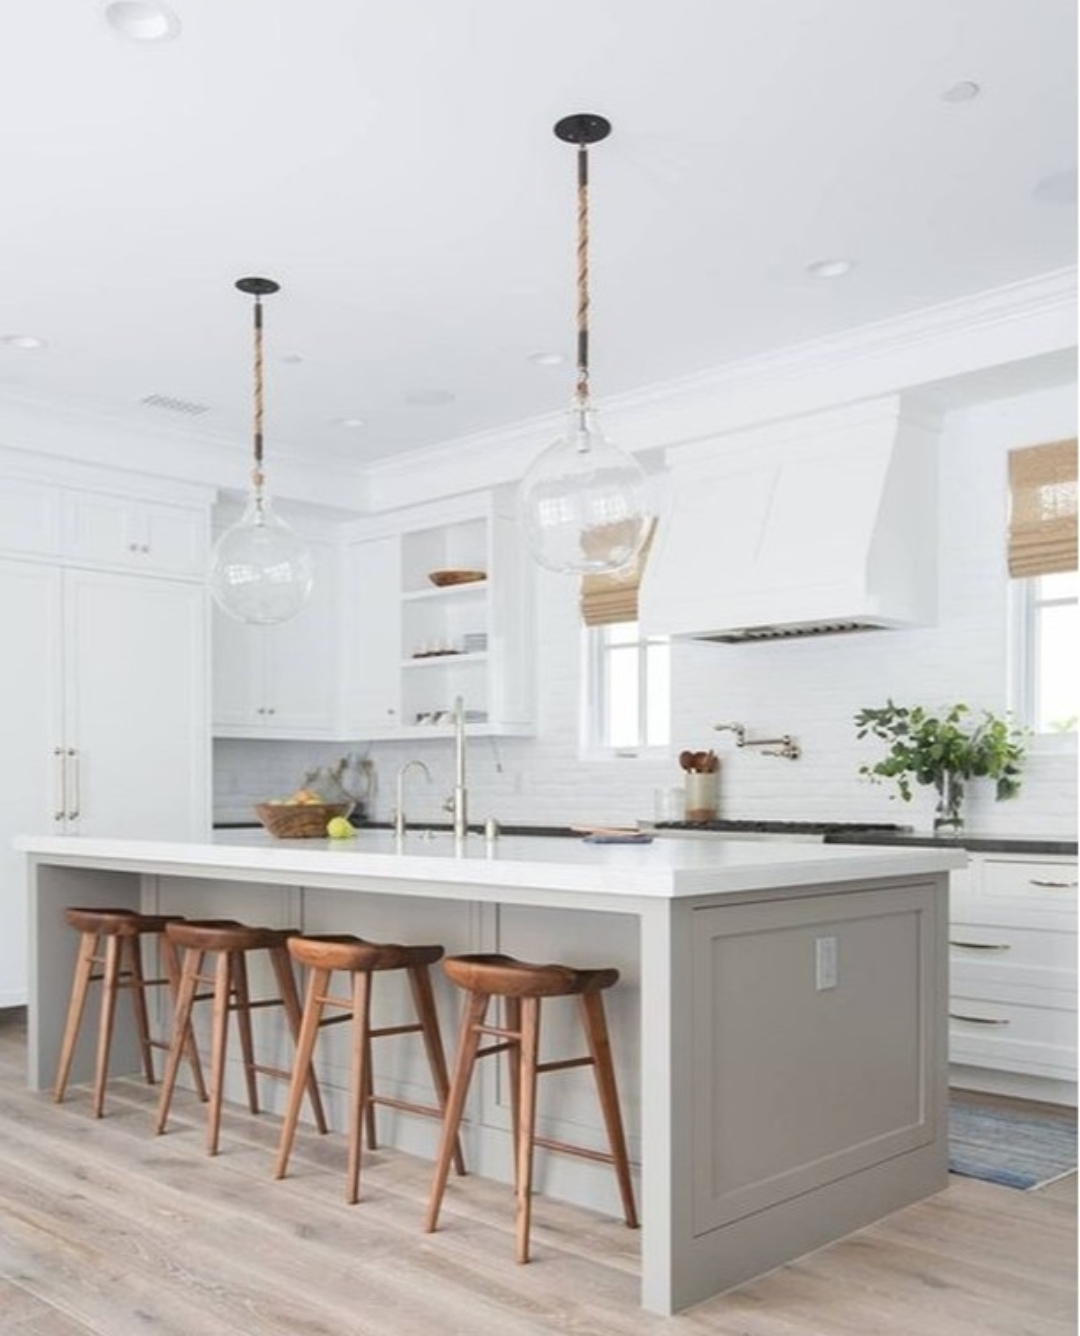 5 Reasons Porcelain is a Great Choice for Kitchen Countertops | One ...